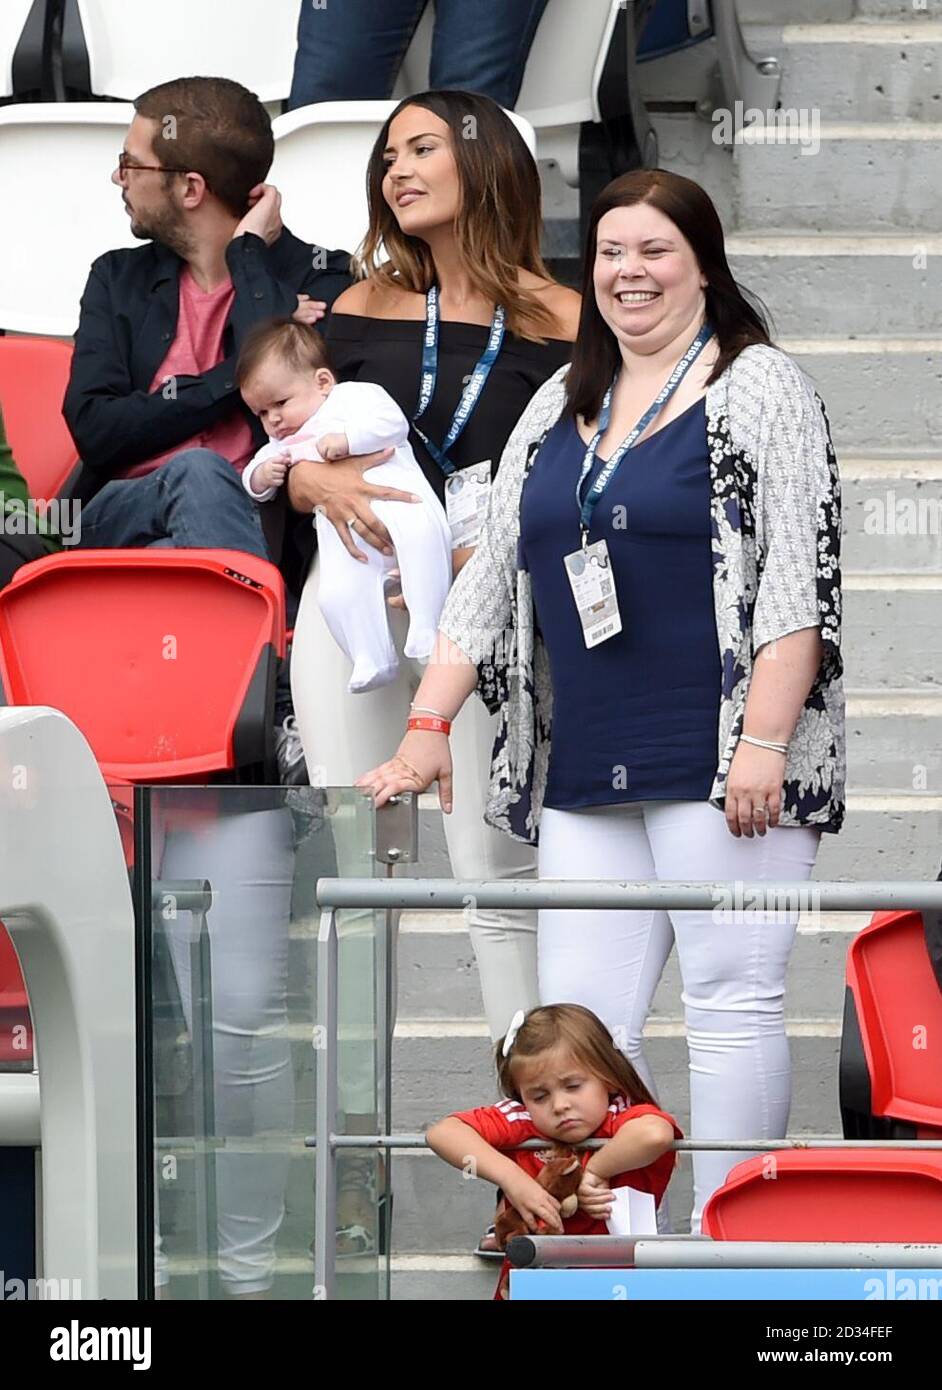 Wales' Gareth Bales partner Emma Rhys-Jones (centre left) , holding  daughter Nava Valentina, sister Vicky Bale (right) with daughter Alba Violet  (bottom) during the round of 16 match at the Parc de